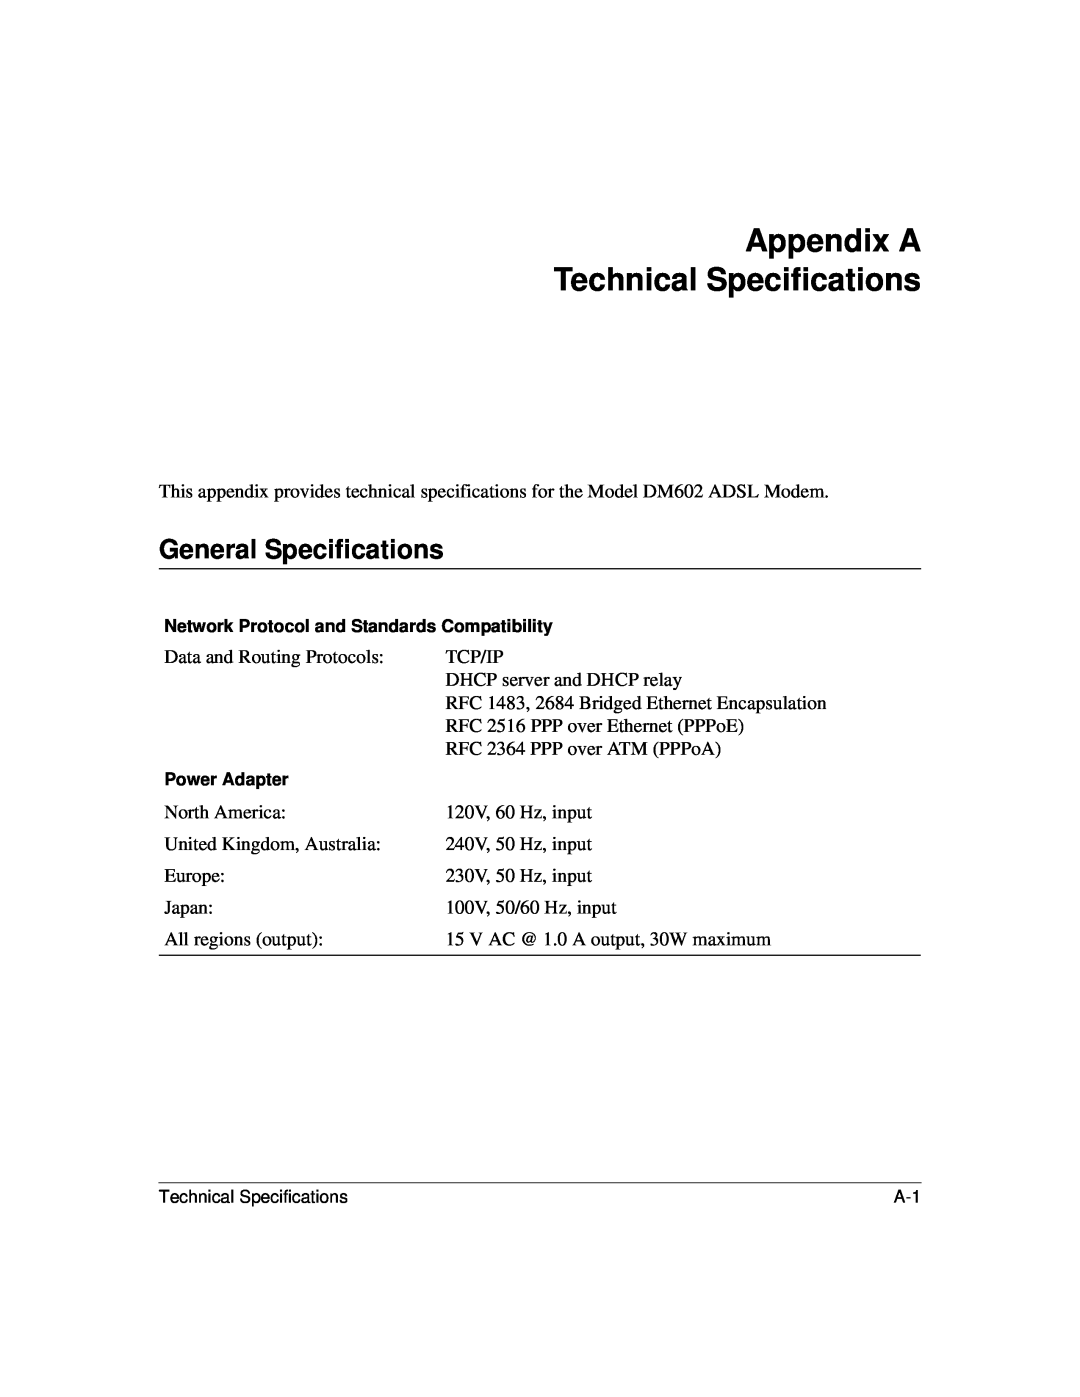 NETGEAR DM602 manual Appendix A Technical Specifications, General Specifications 